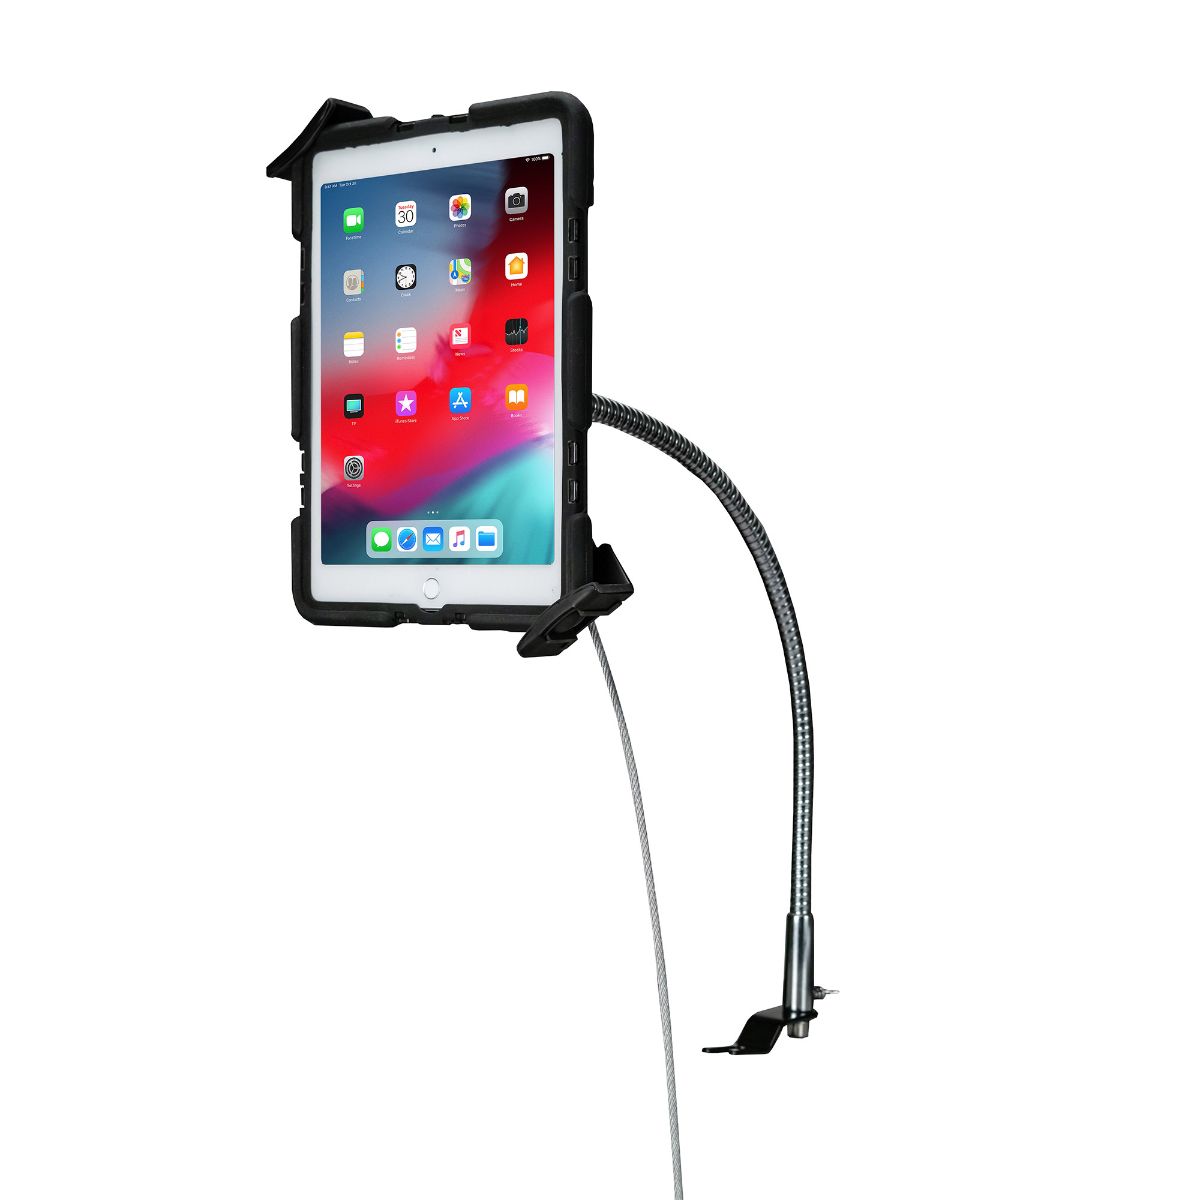 Quick-Release Security Gooseneck Car Mount for iPad Air & iPad Pro 11" - M2/M4, iPad Air & iPad Pro 13" - M2/M4 and more 7-14 Inch Tablets